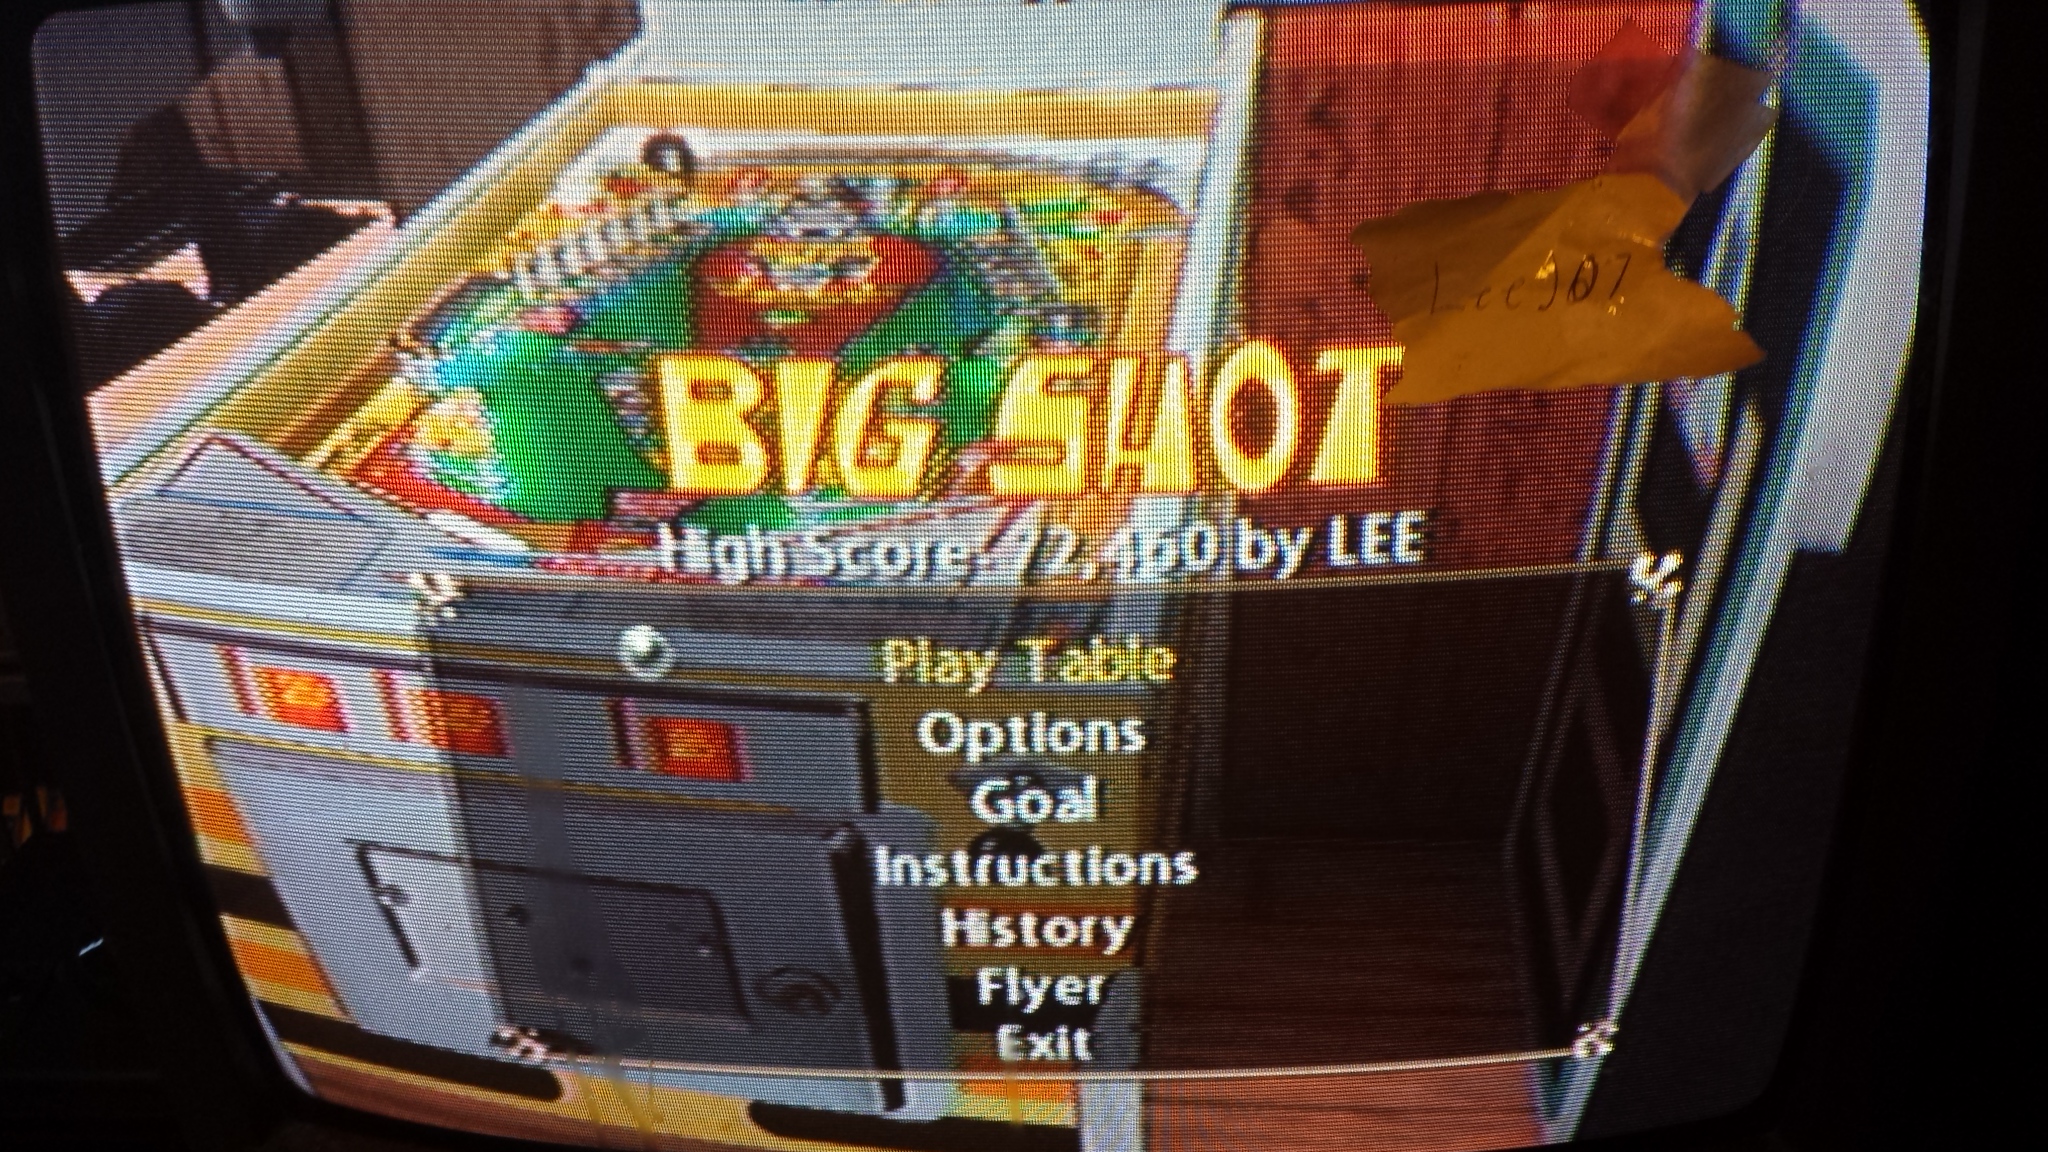 LeeJ07: Pinball Hall Of Fame: The Gottlieb Collection: Big Shot [5 Balls] (Playstation 2) 72,460 points on 2015-11-11 15:14:30